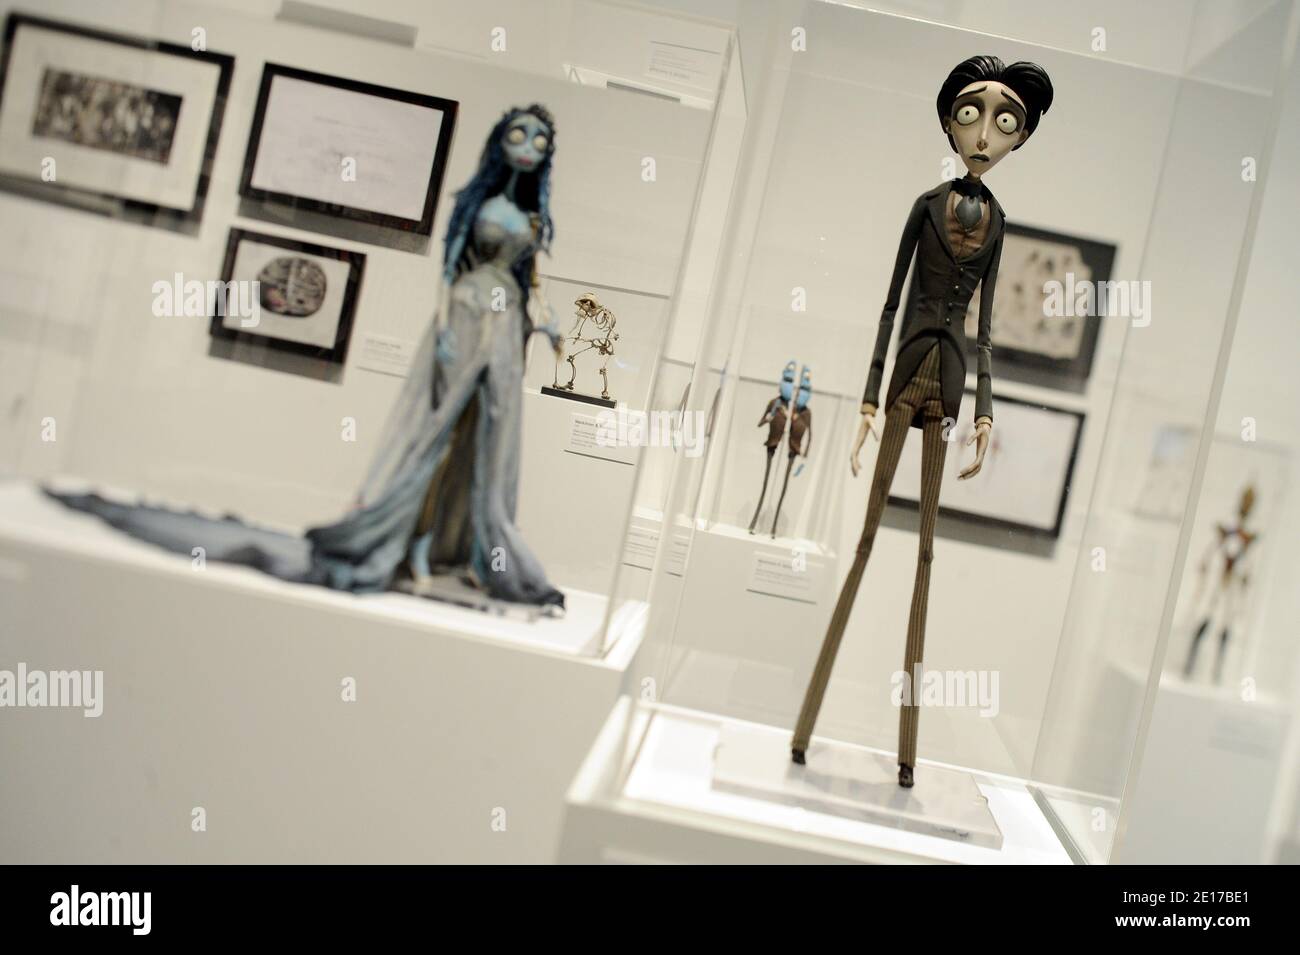 The Tim Burton's exhibition at the Lacma in Los Angeles, California on June  1, 2011. The Los Angeles County Museum of Art (LACMA) presents Tim Burton,  a major retrospective exploring the full